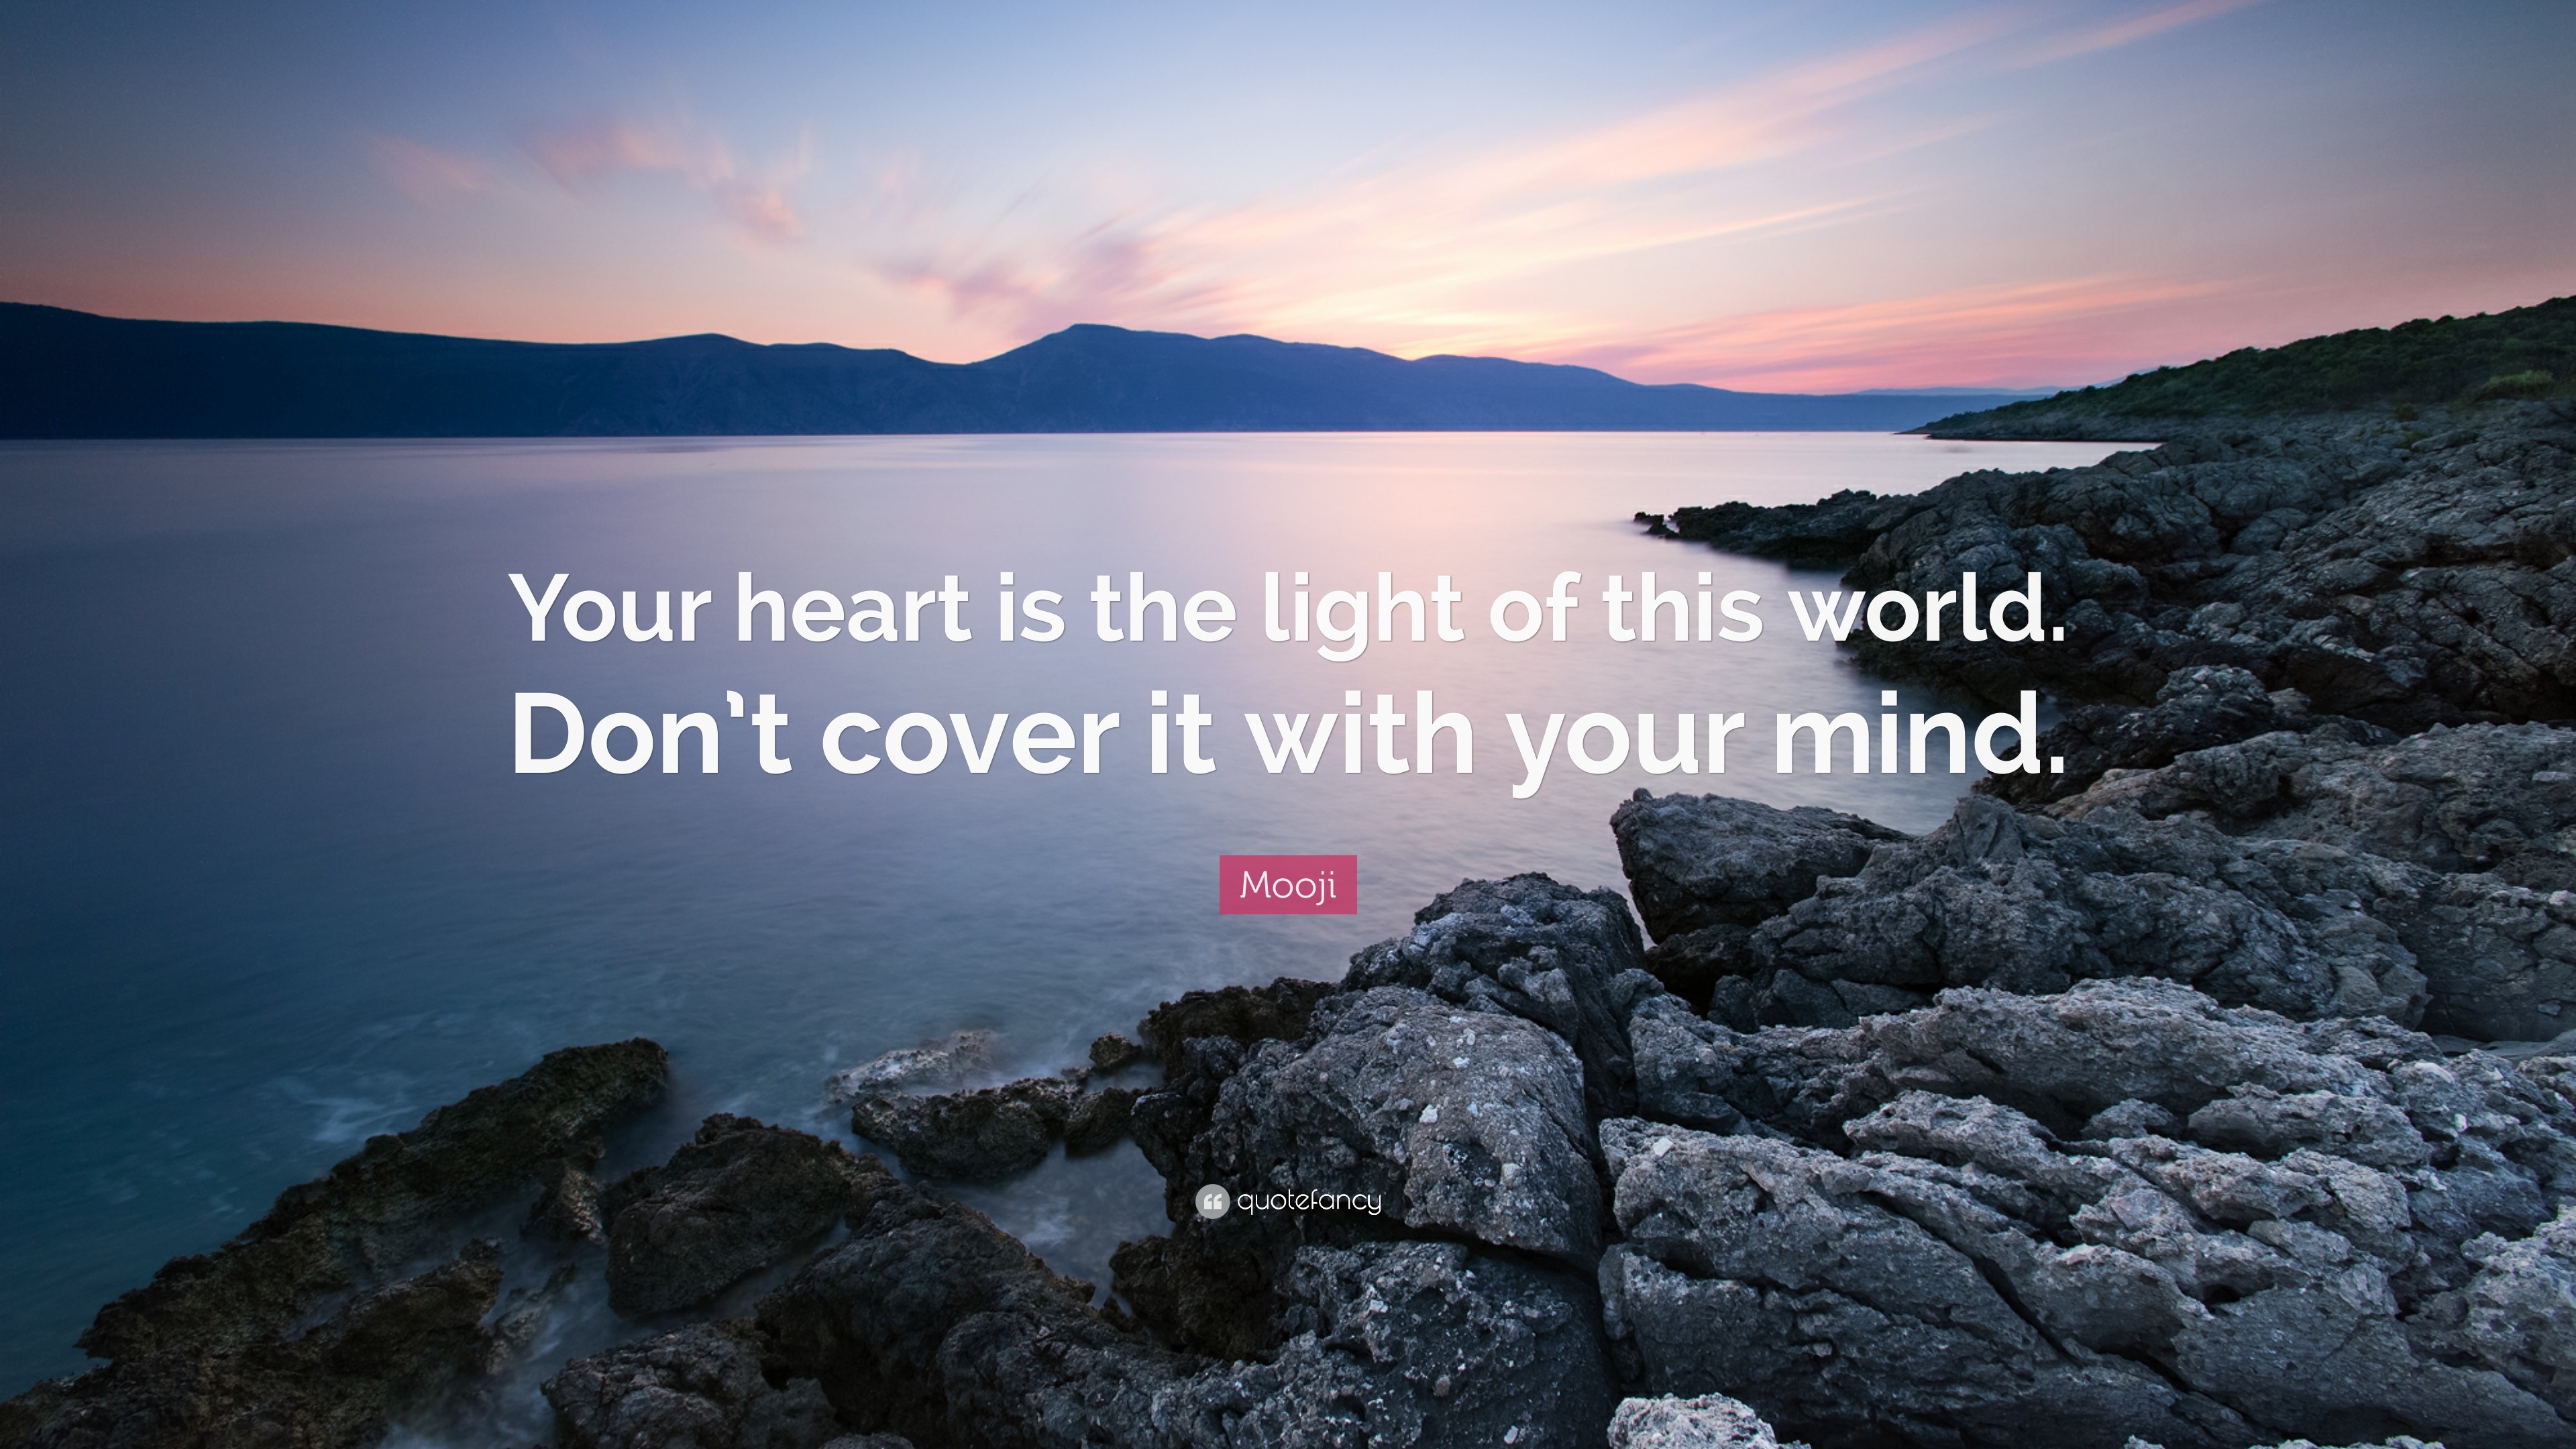 Mooji Quote: “Your heart is the light of this world. cover it with your